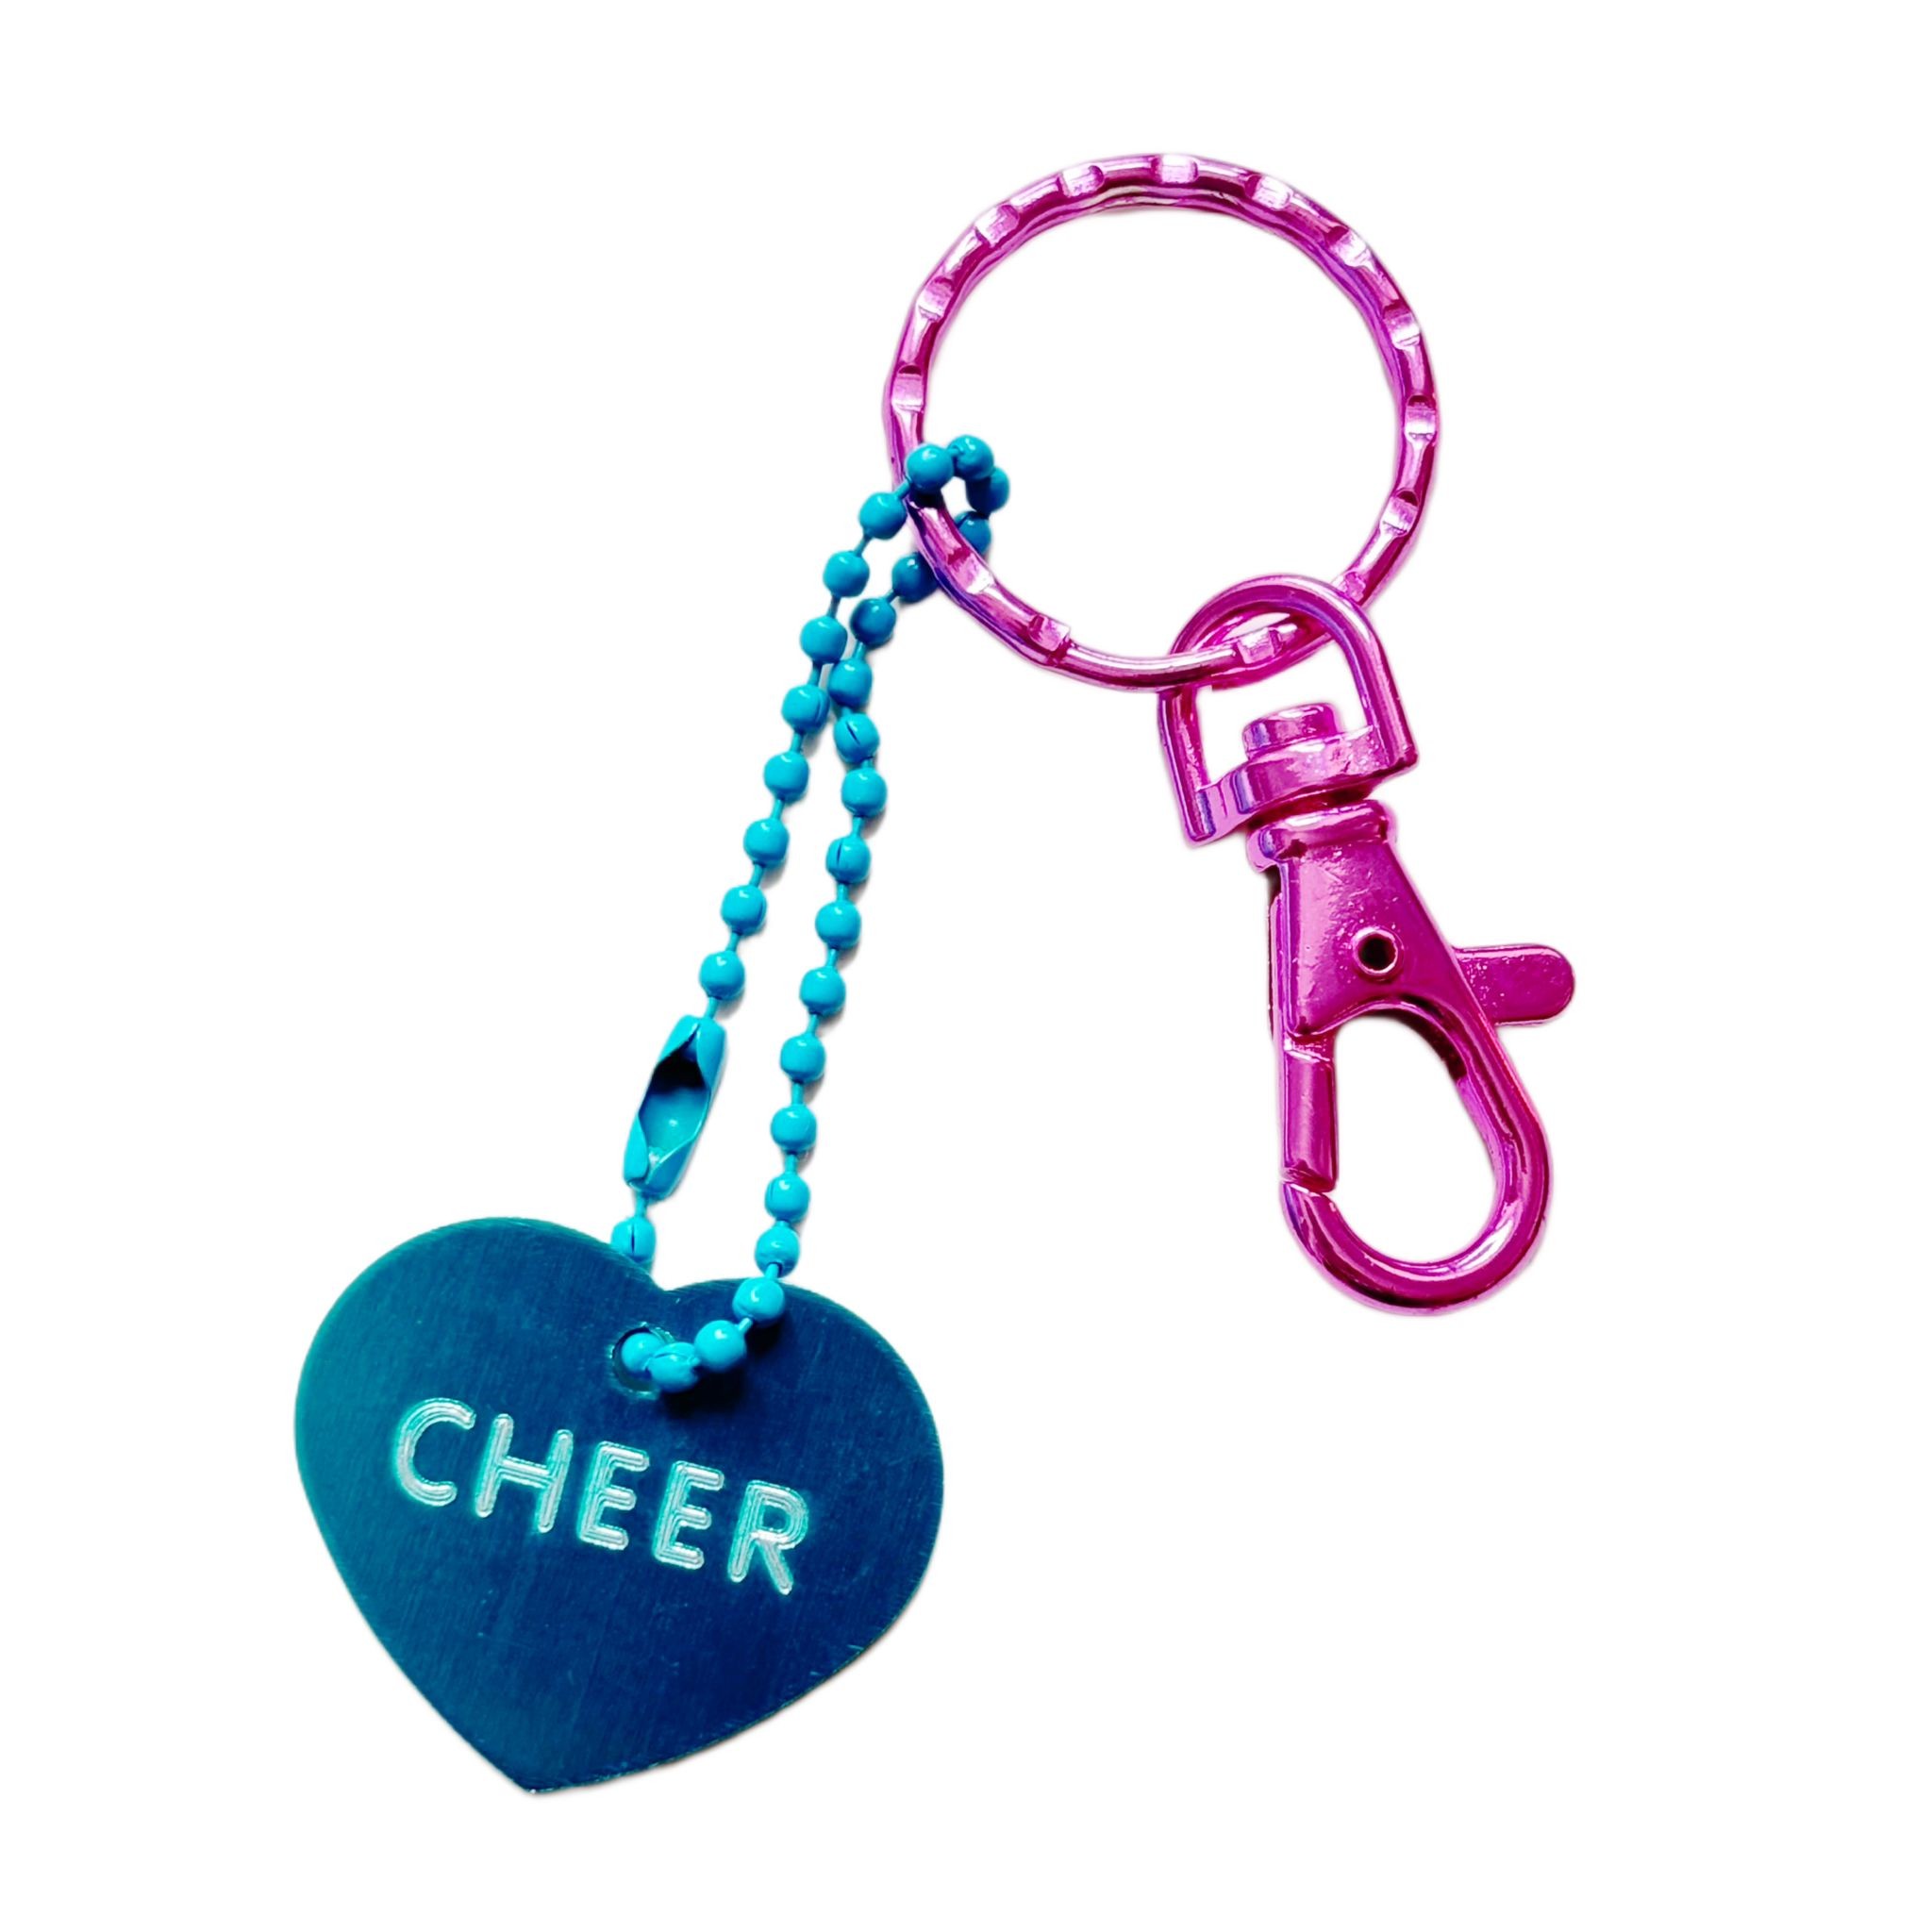 Full Color Cheer Keychain - END OF STOCK